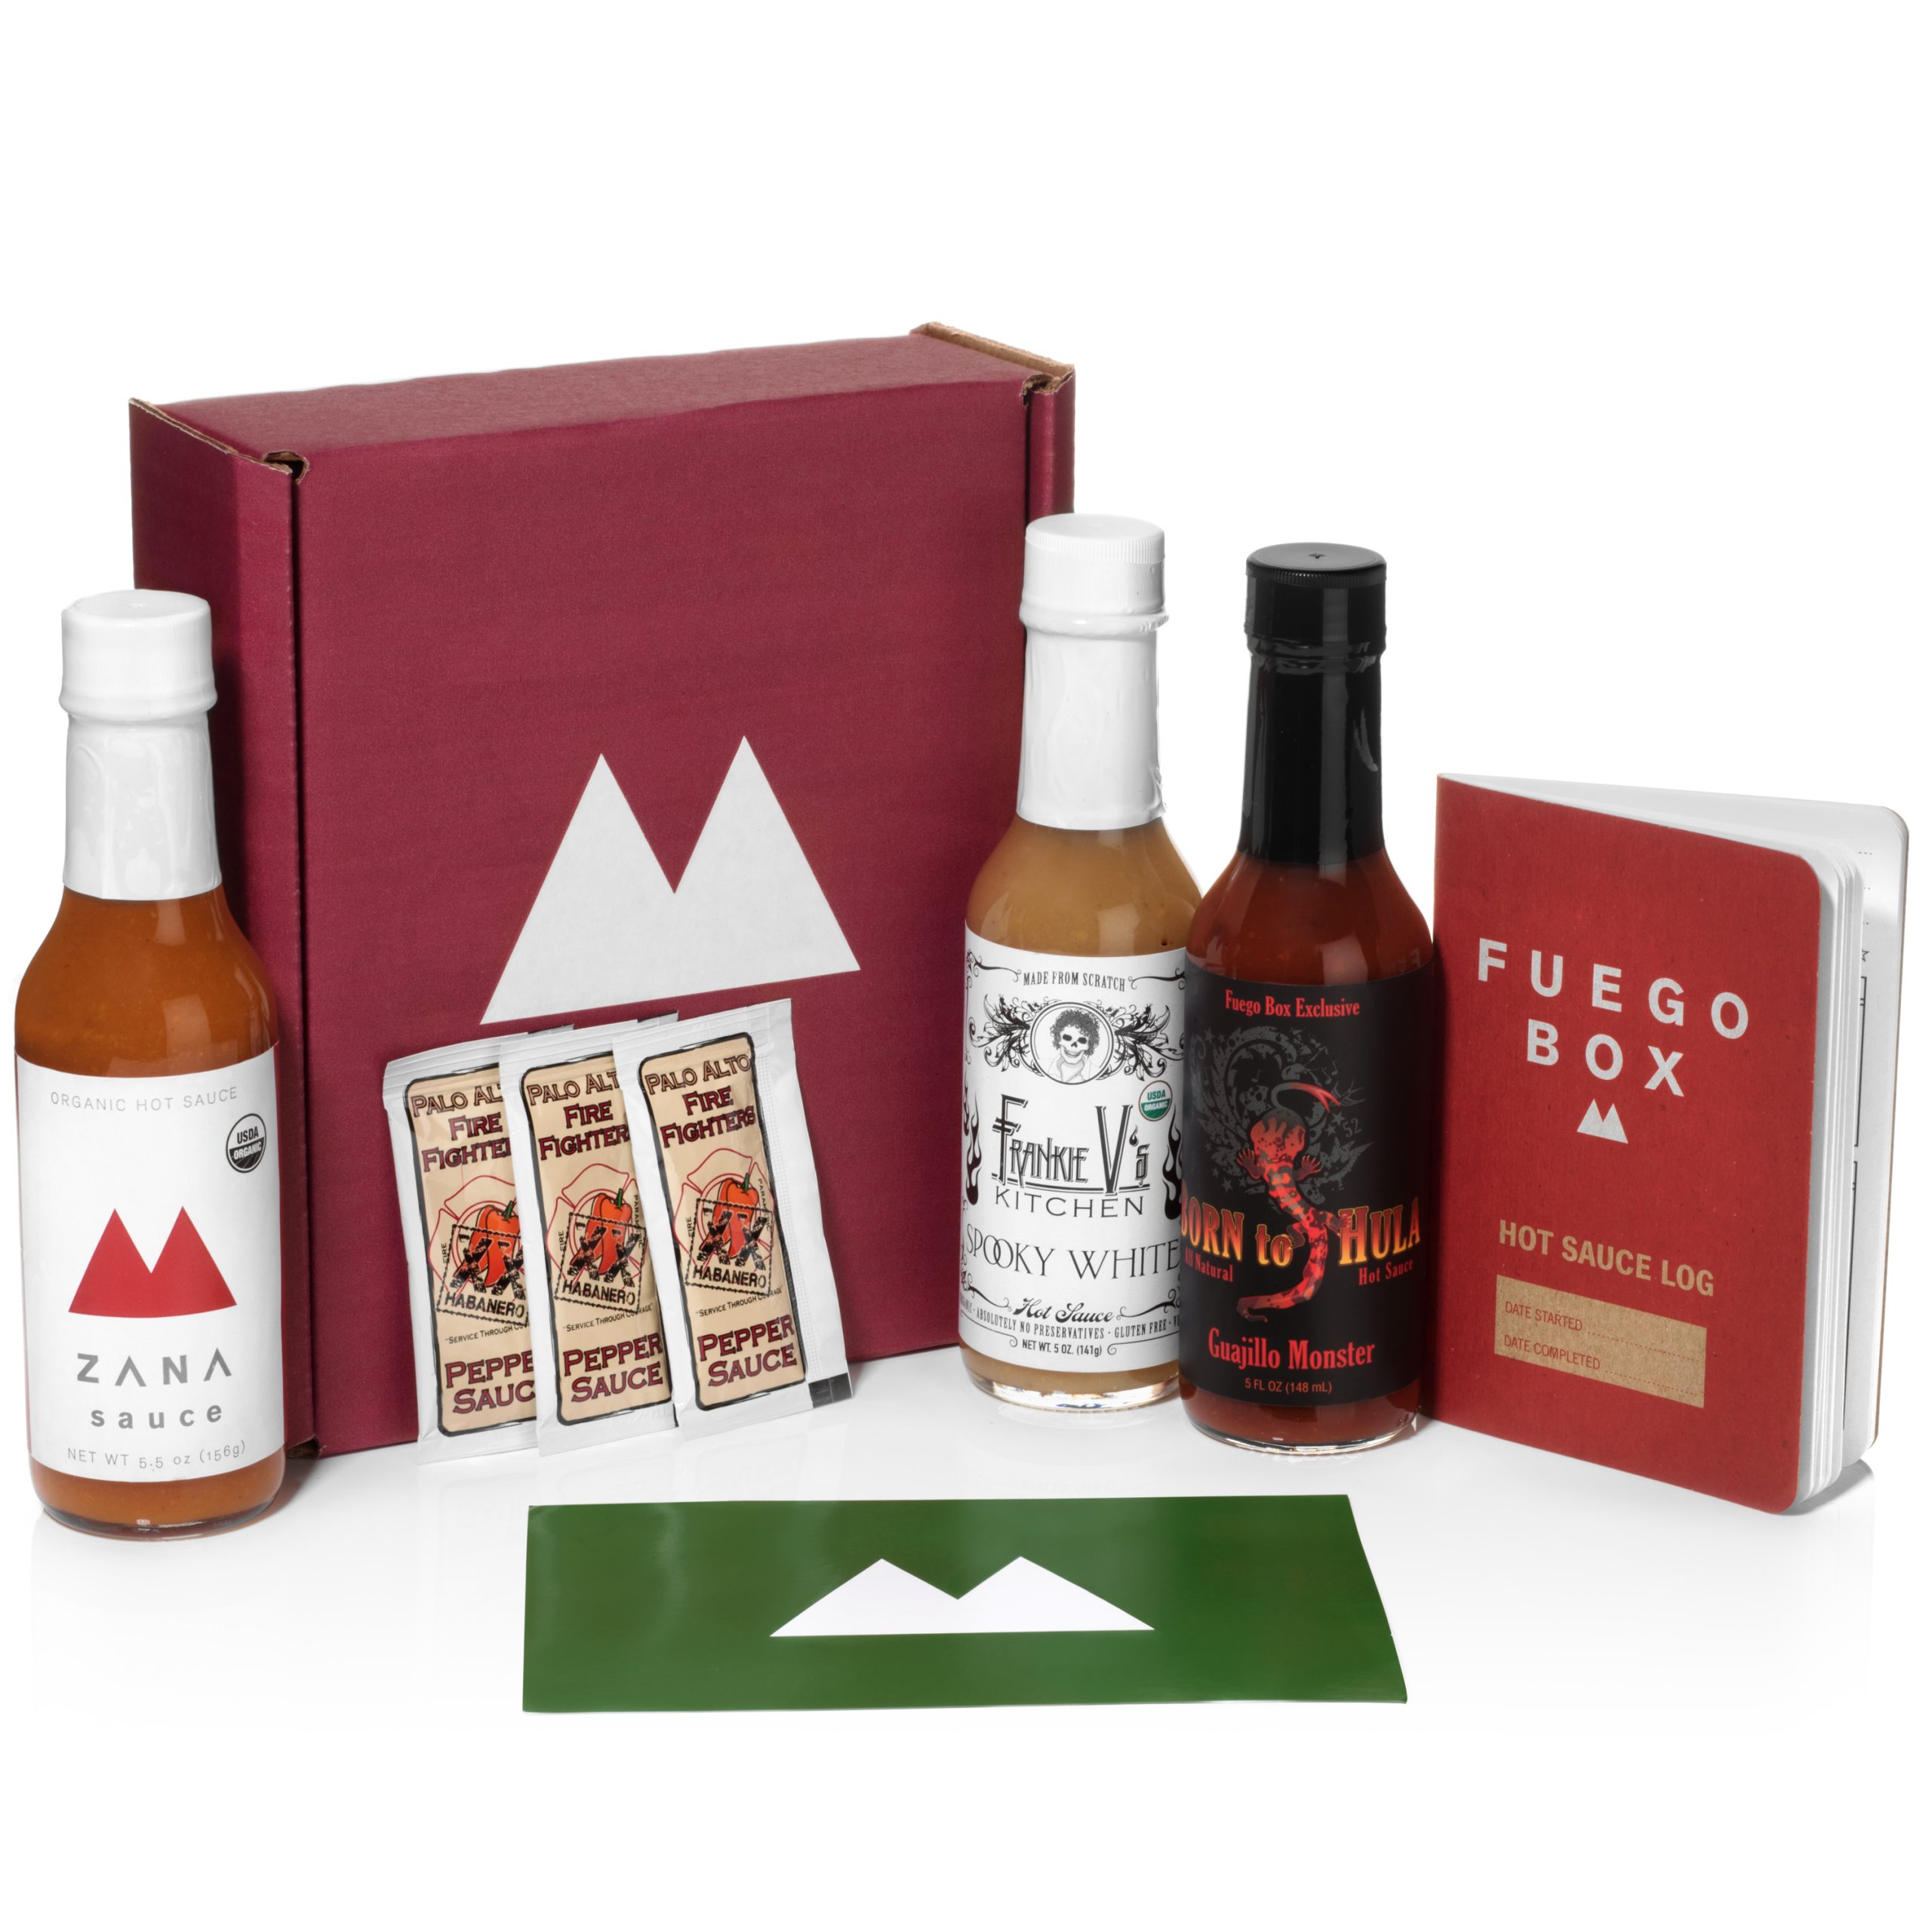 Fuego Box, hot sauce of the month